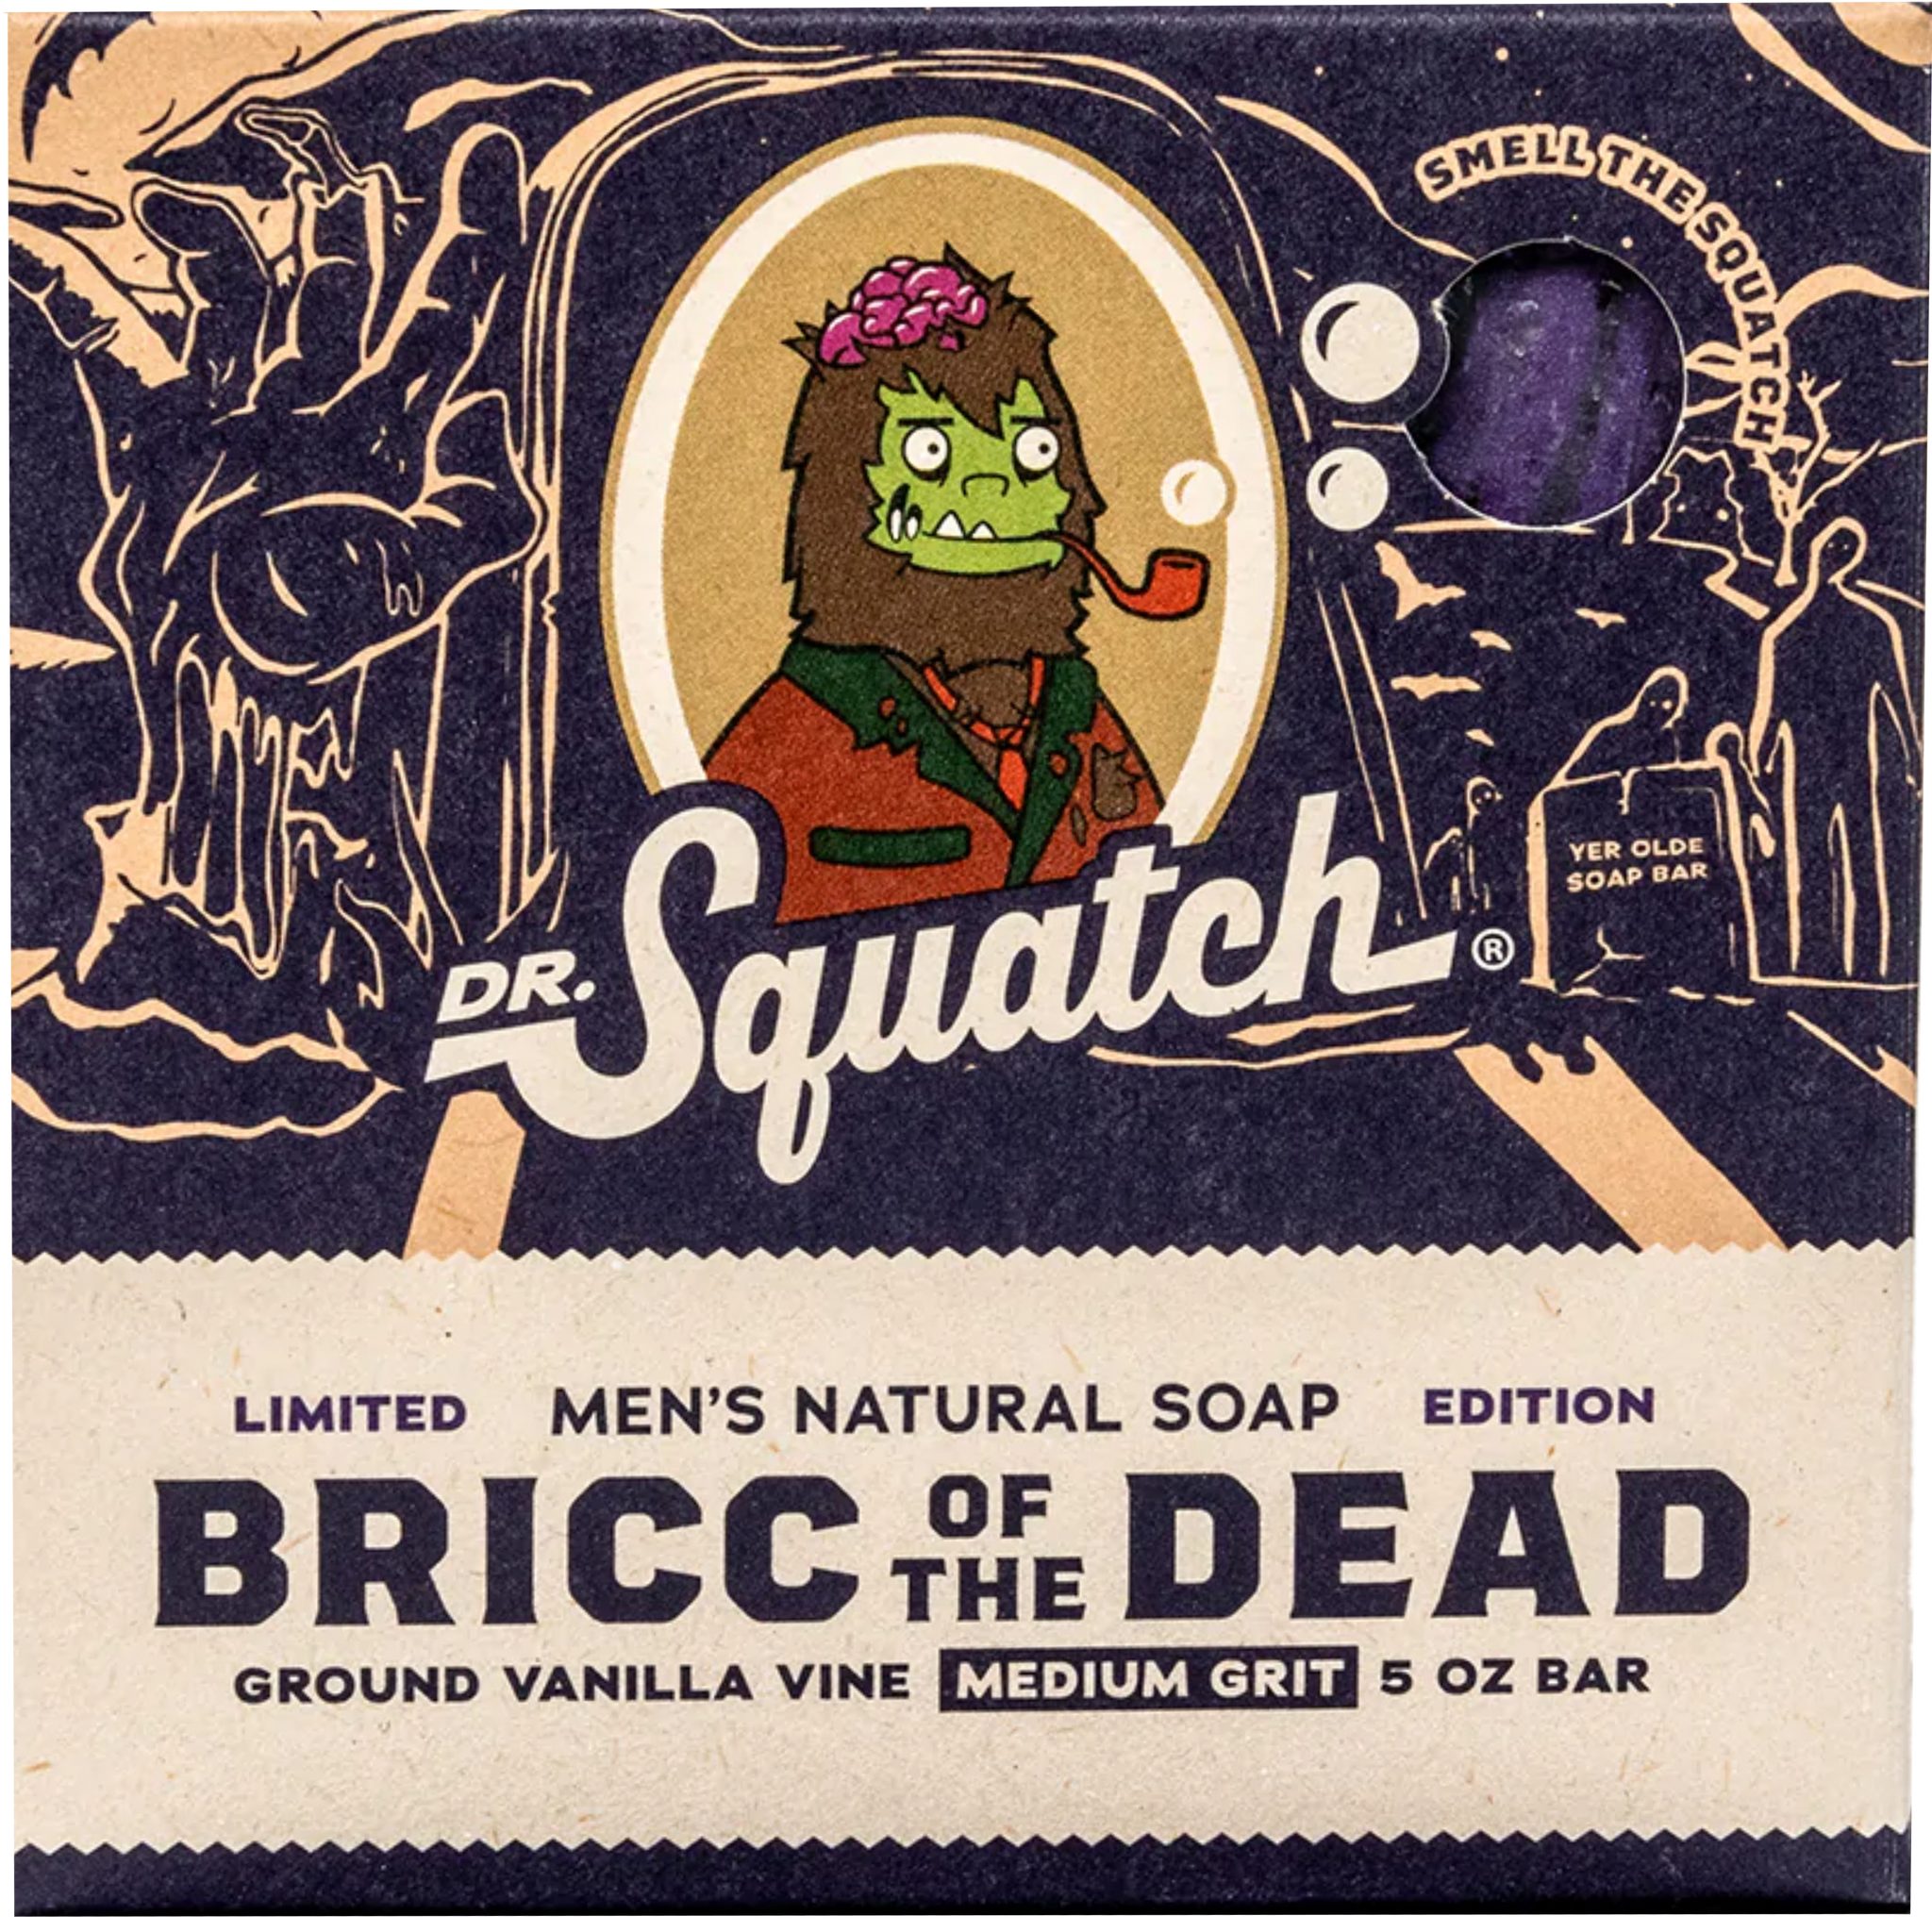 Dr. Squatch - Available for Subscription and in the